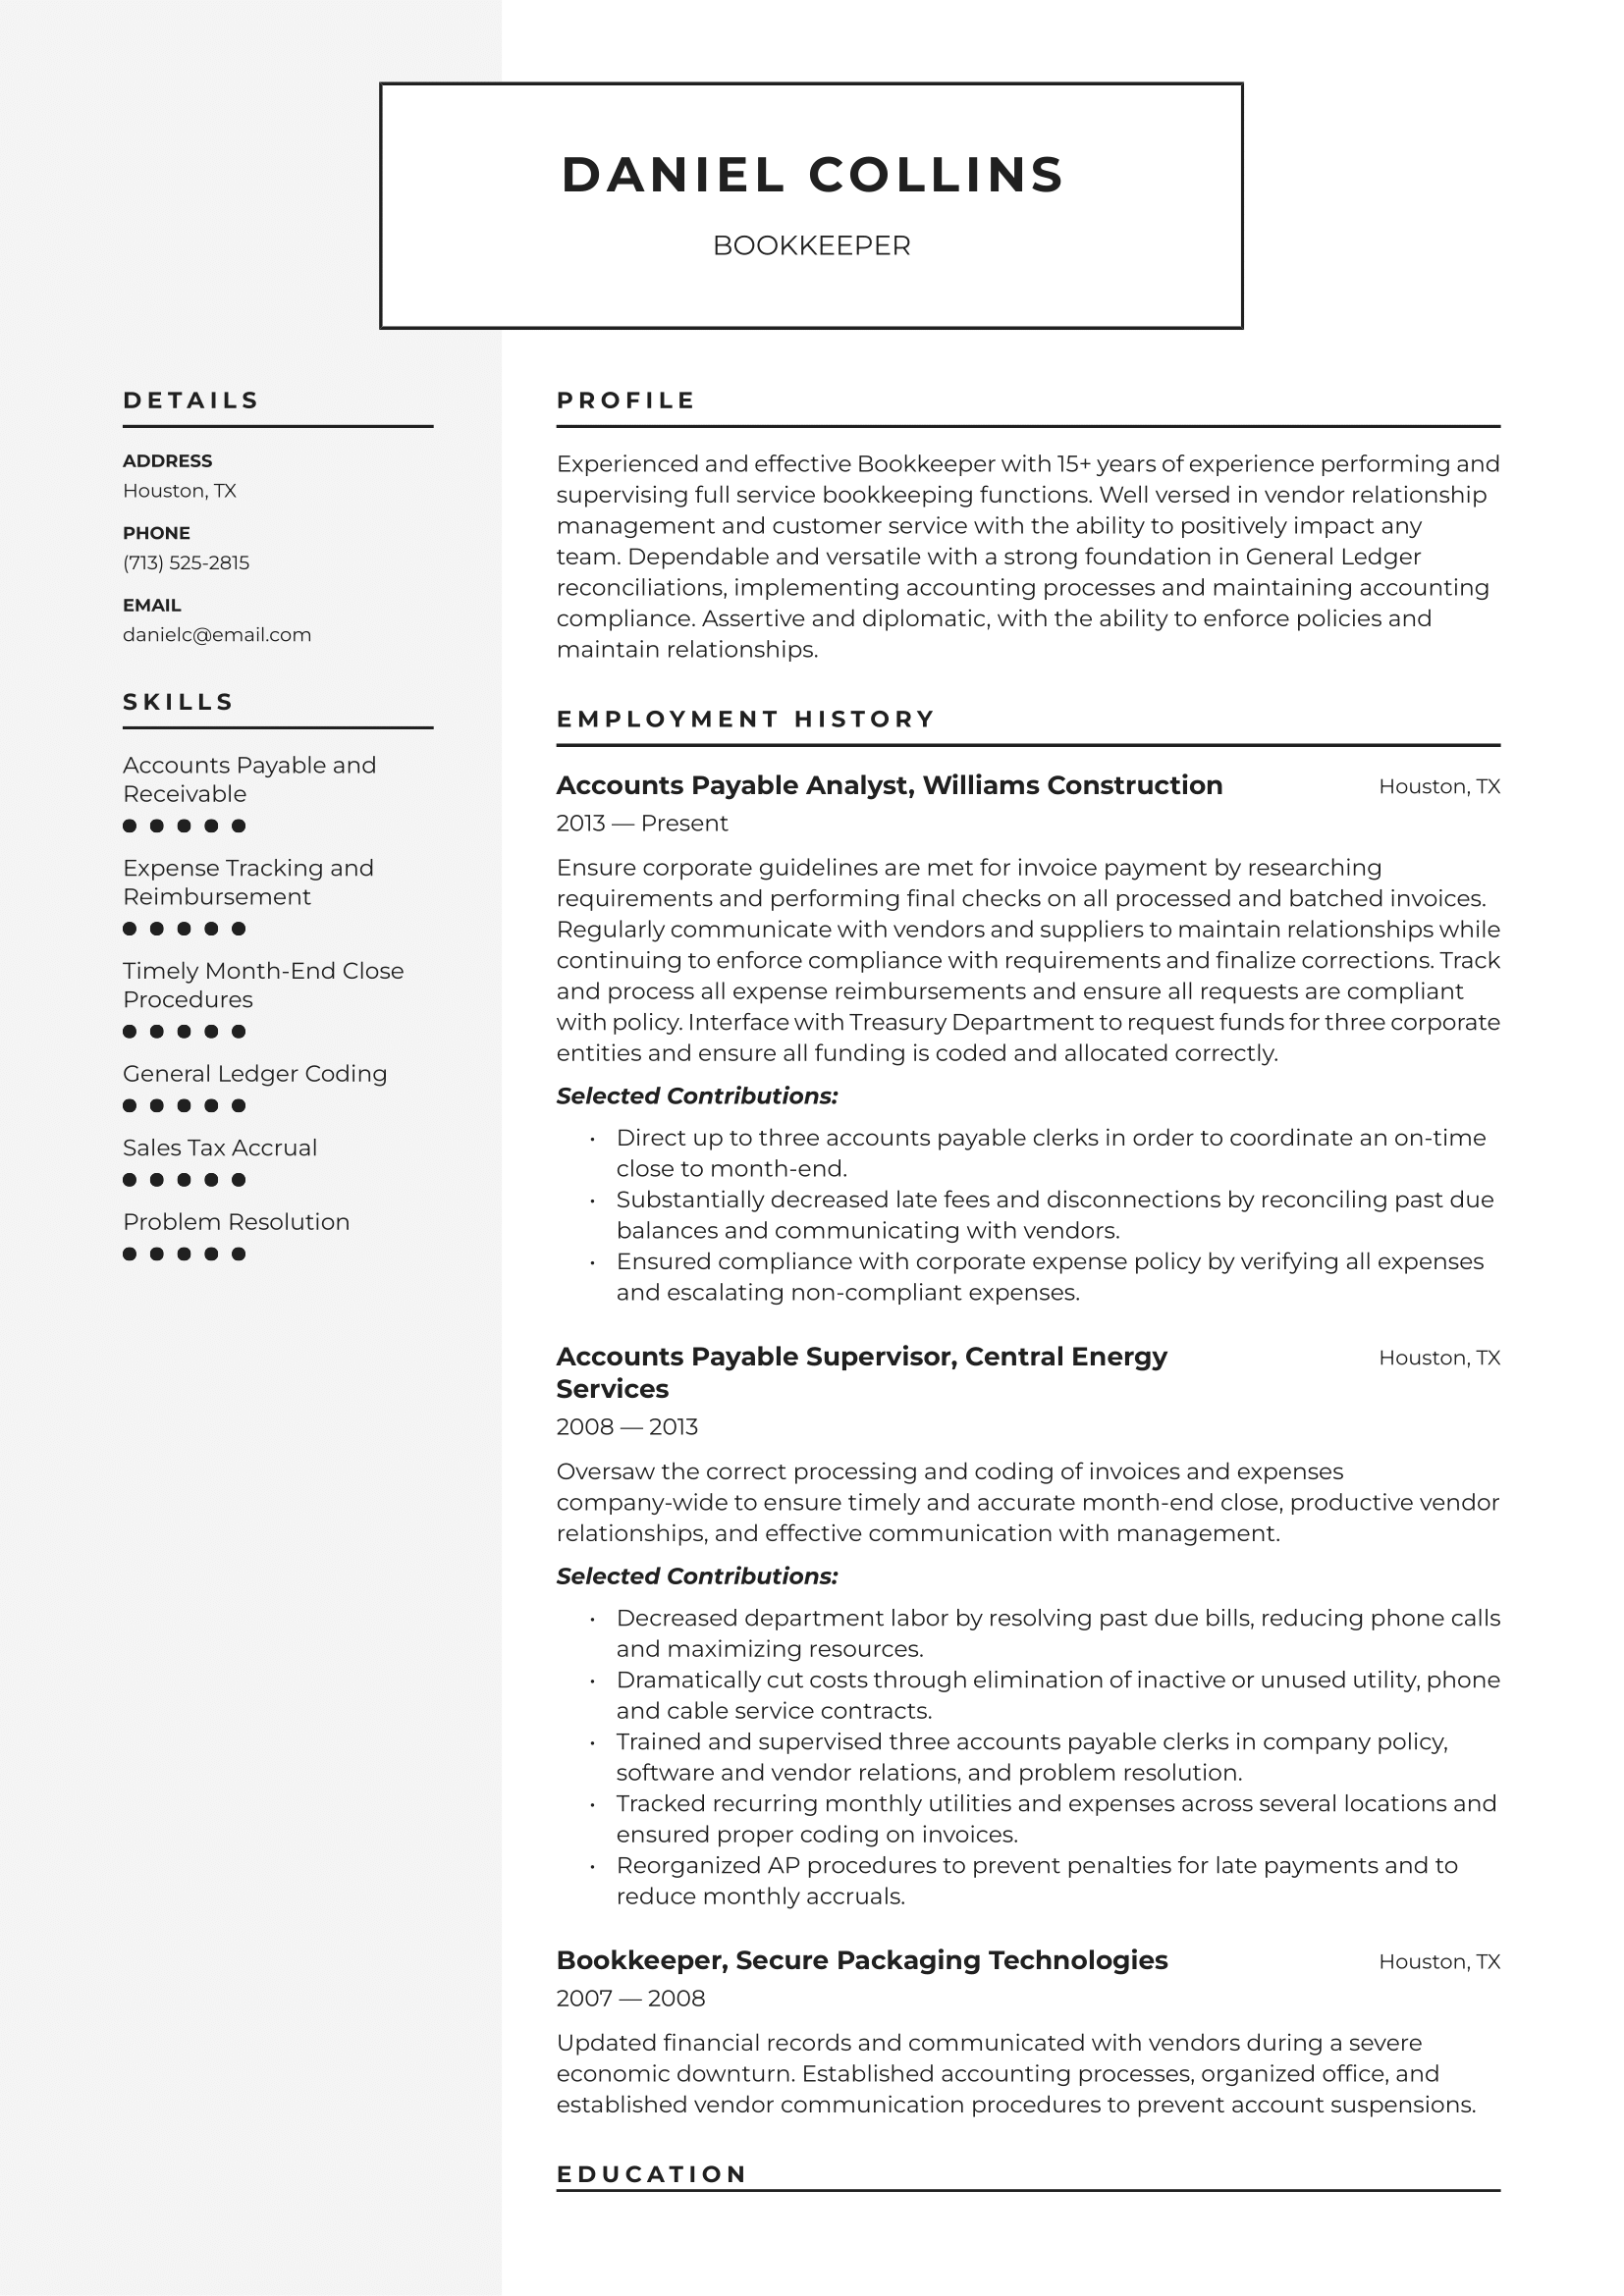 Bookkeeper Resume Example & Writing Guide